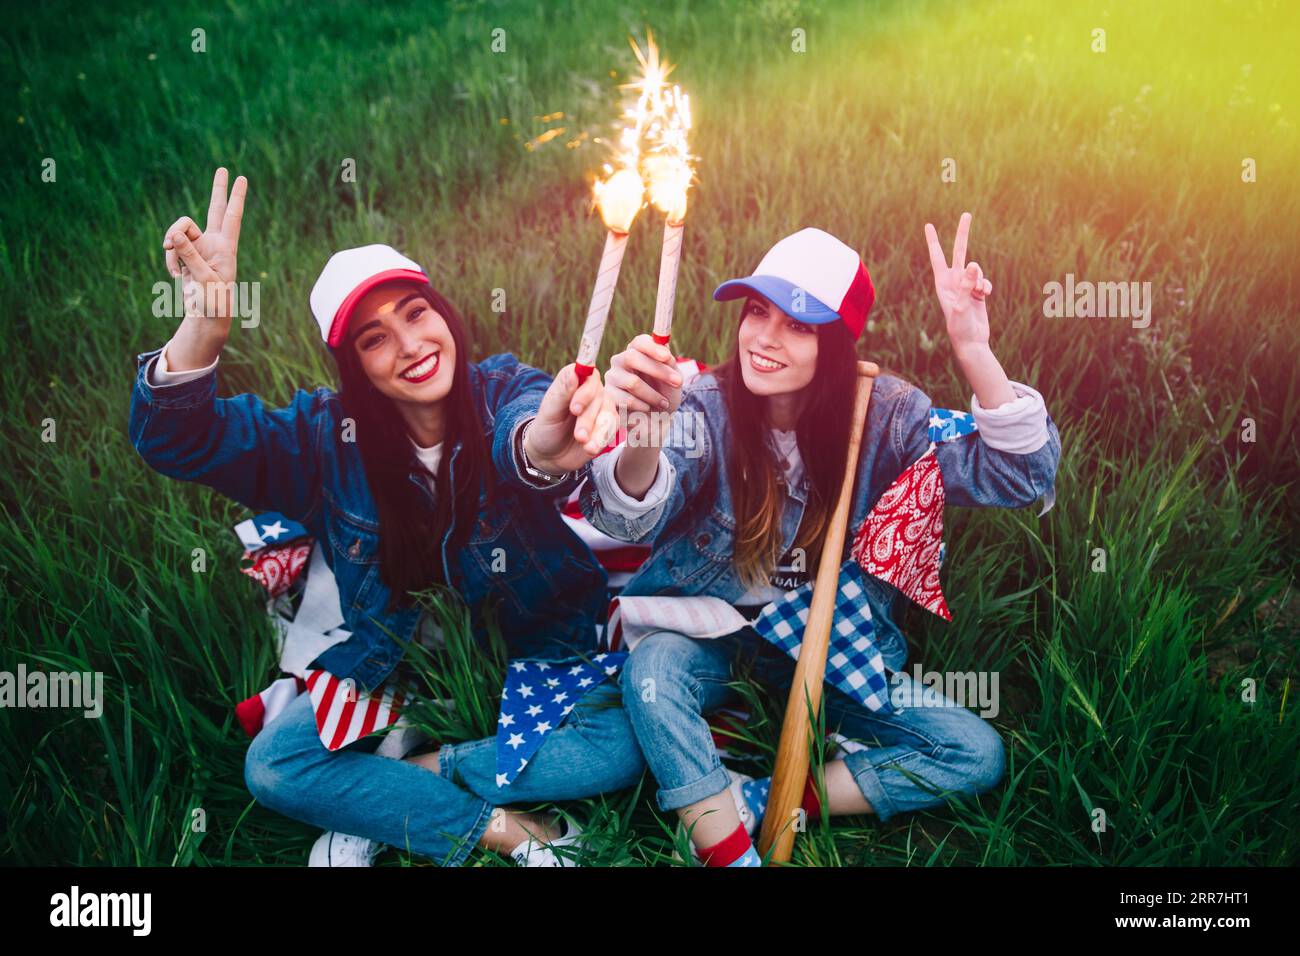 Women with fireworks hands smiling Stock Photo